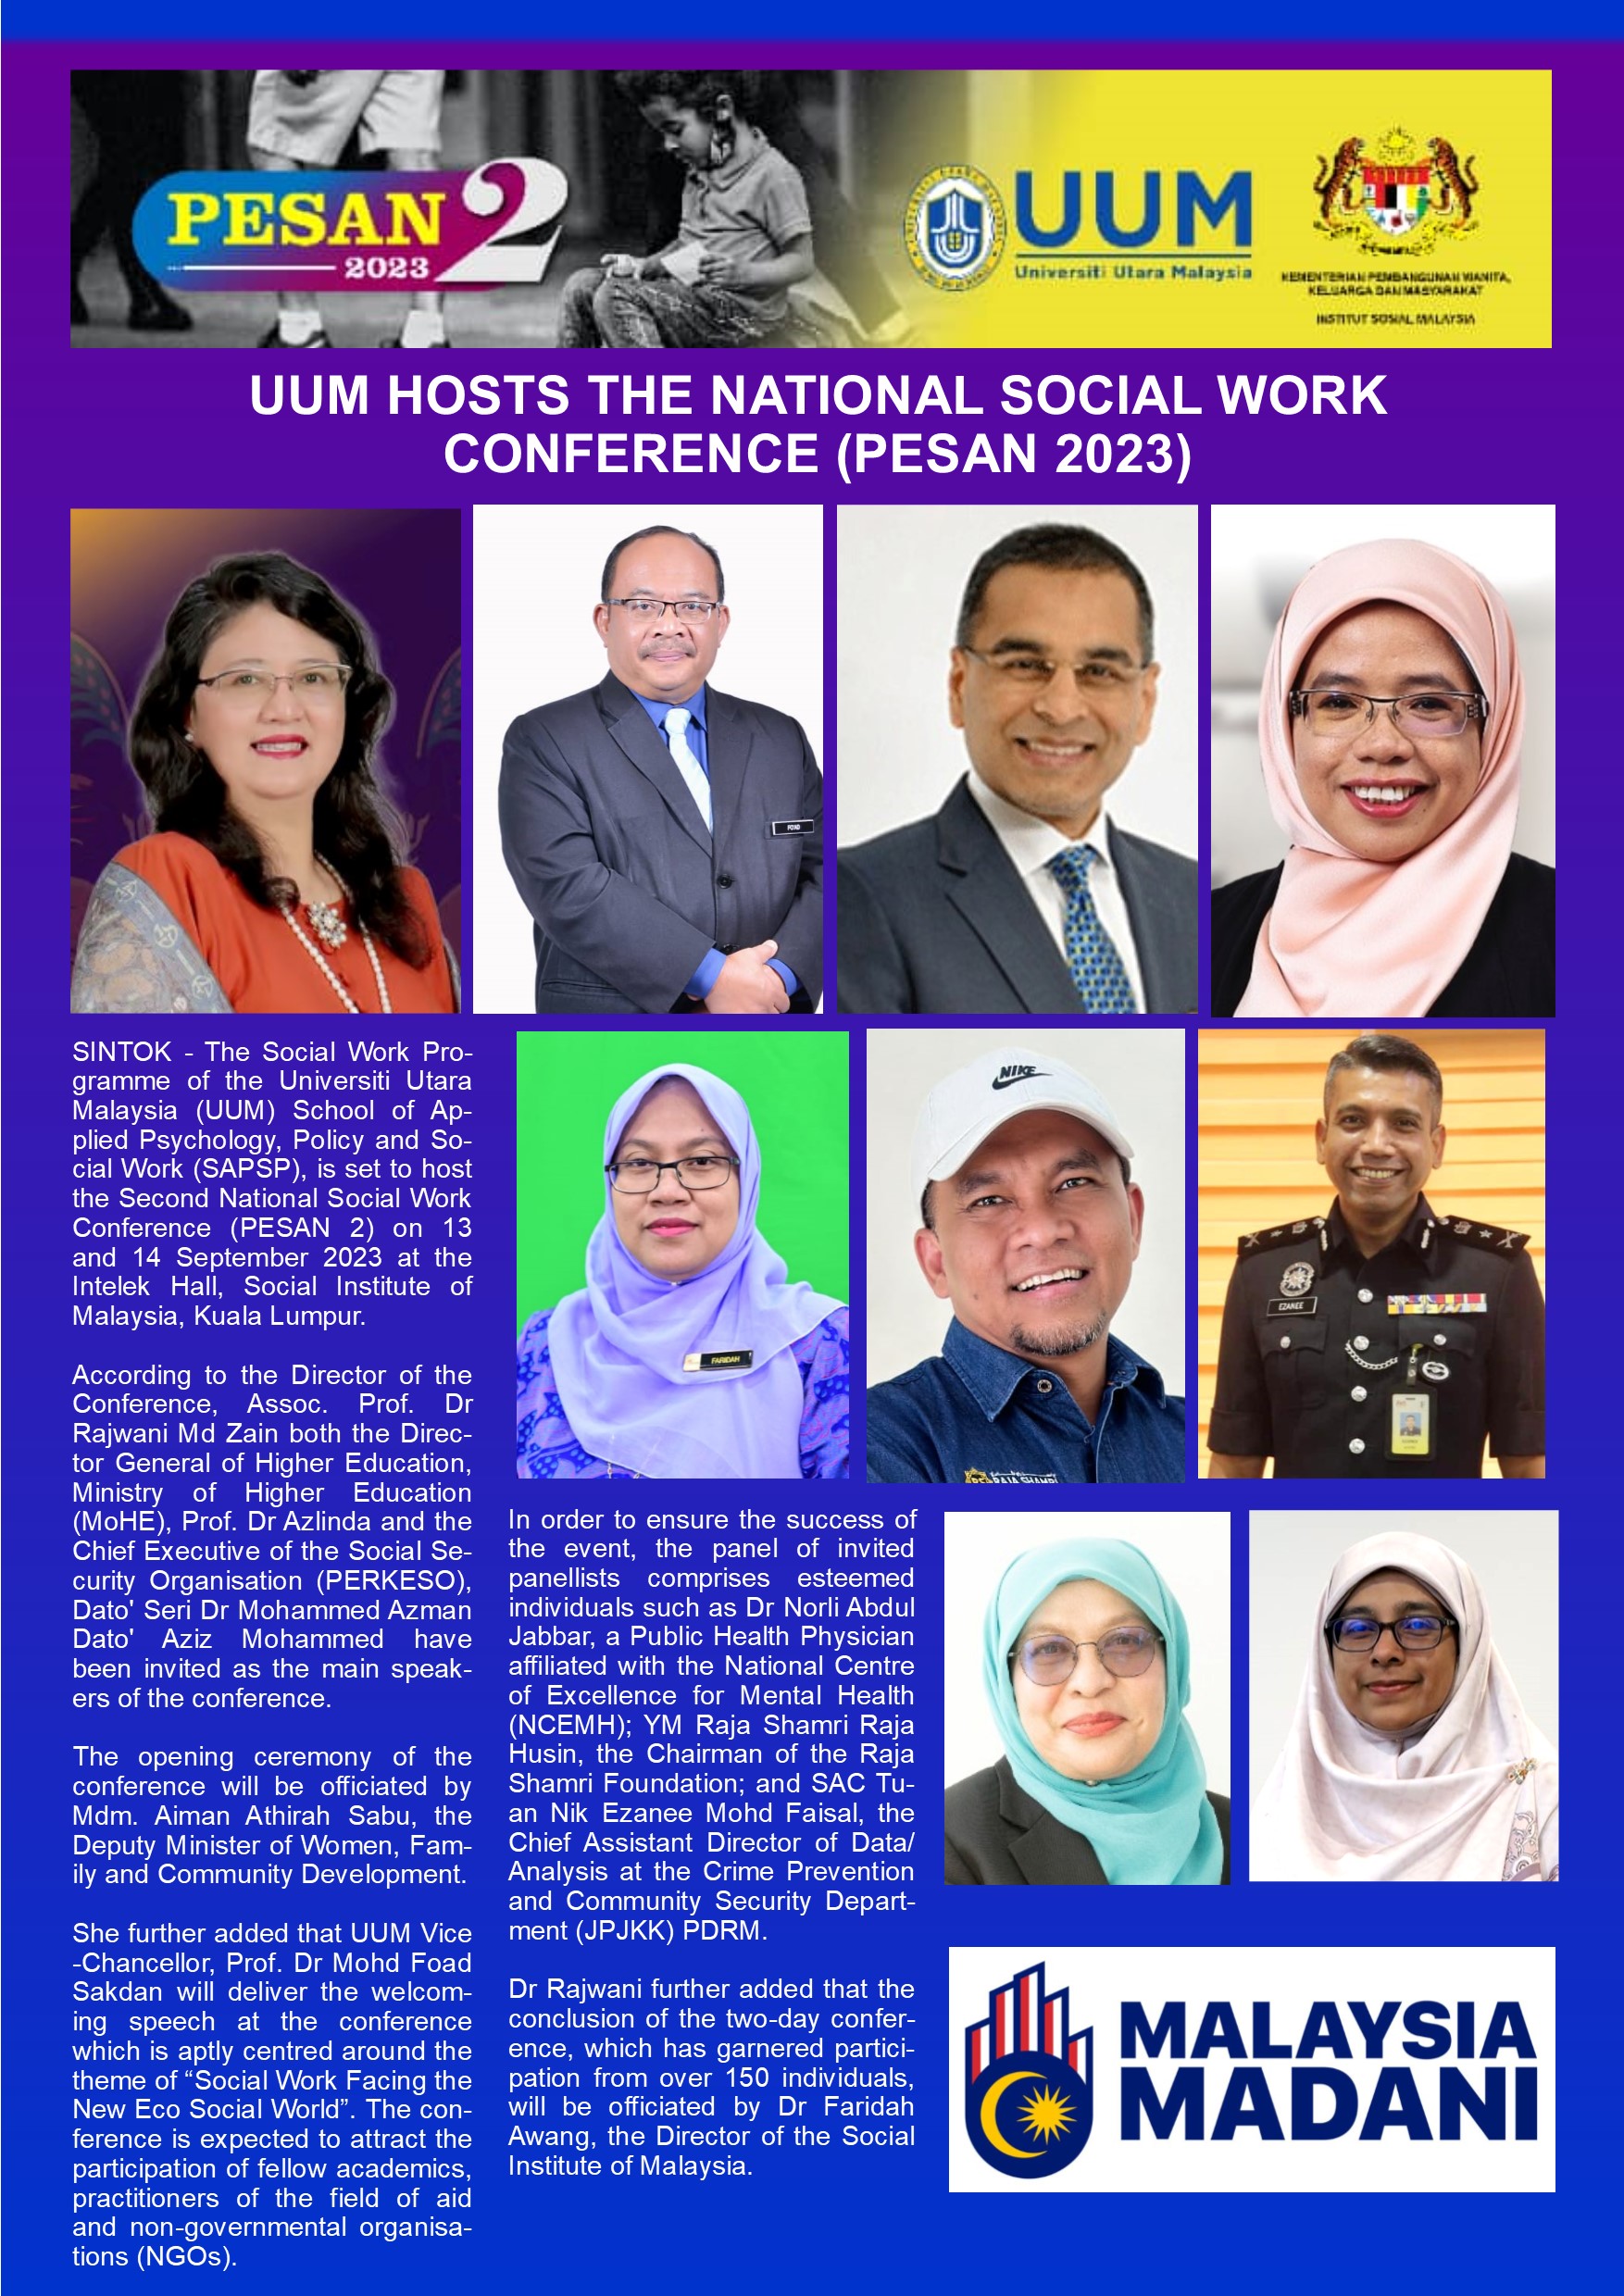 UUM Hosts The National Social Work Conference (PESAN 2023) UUM Today